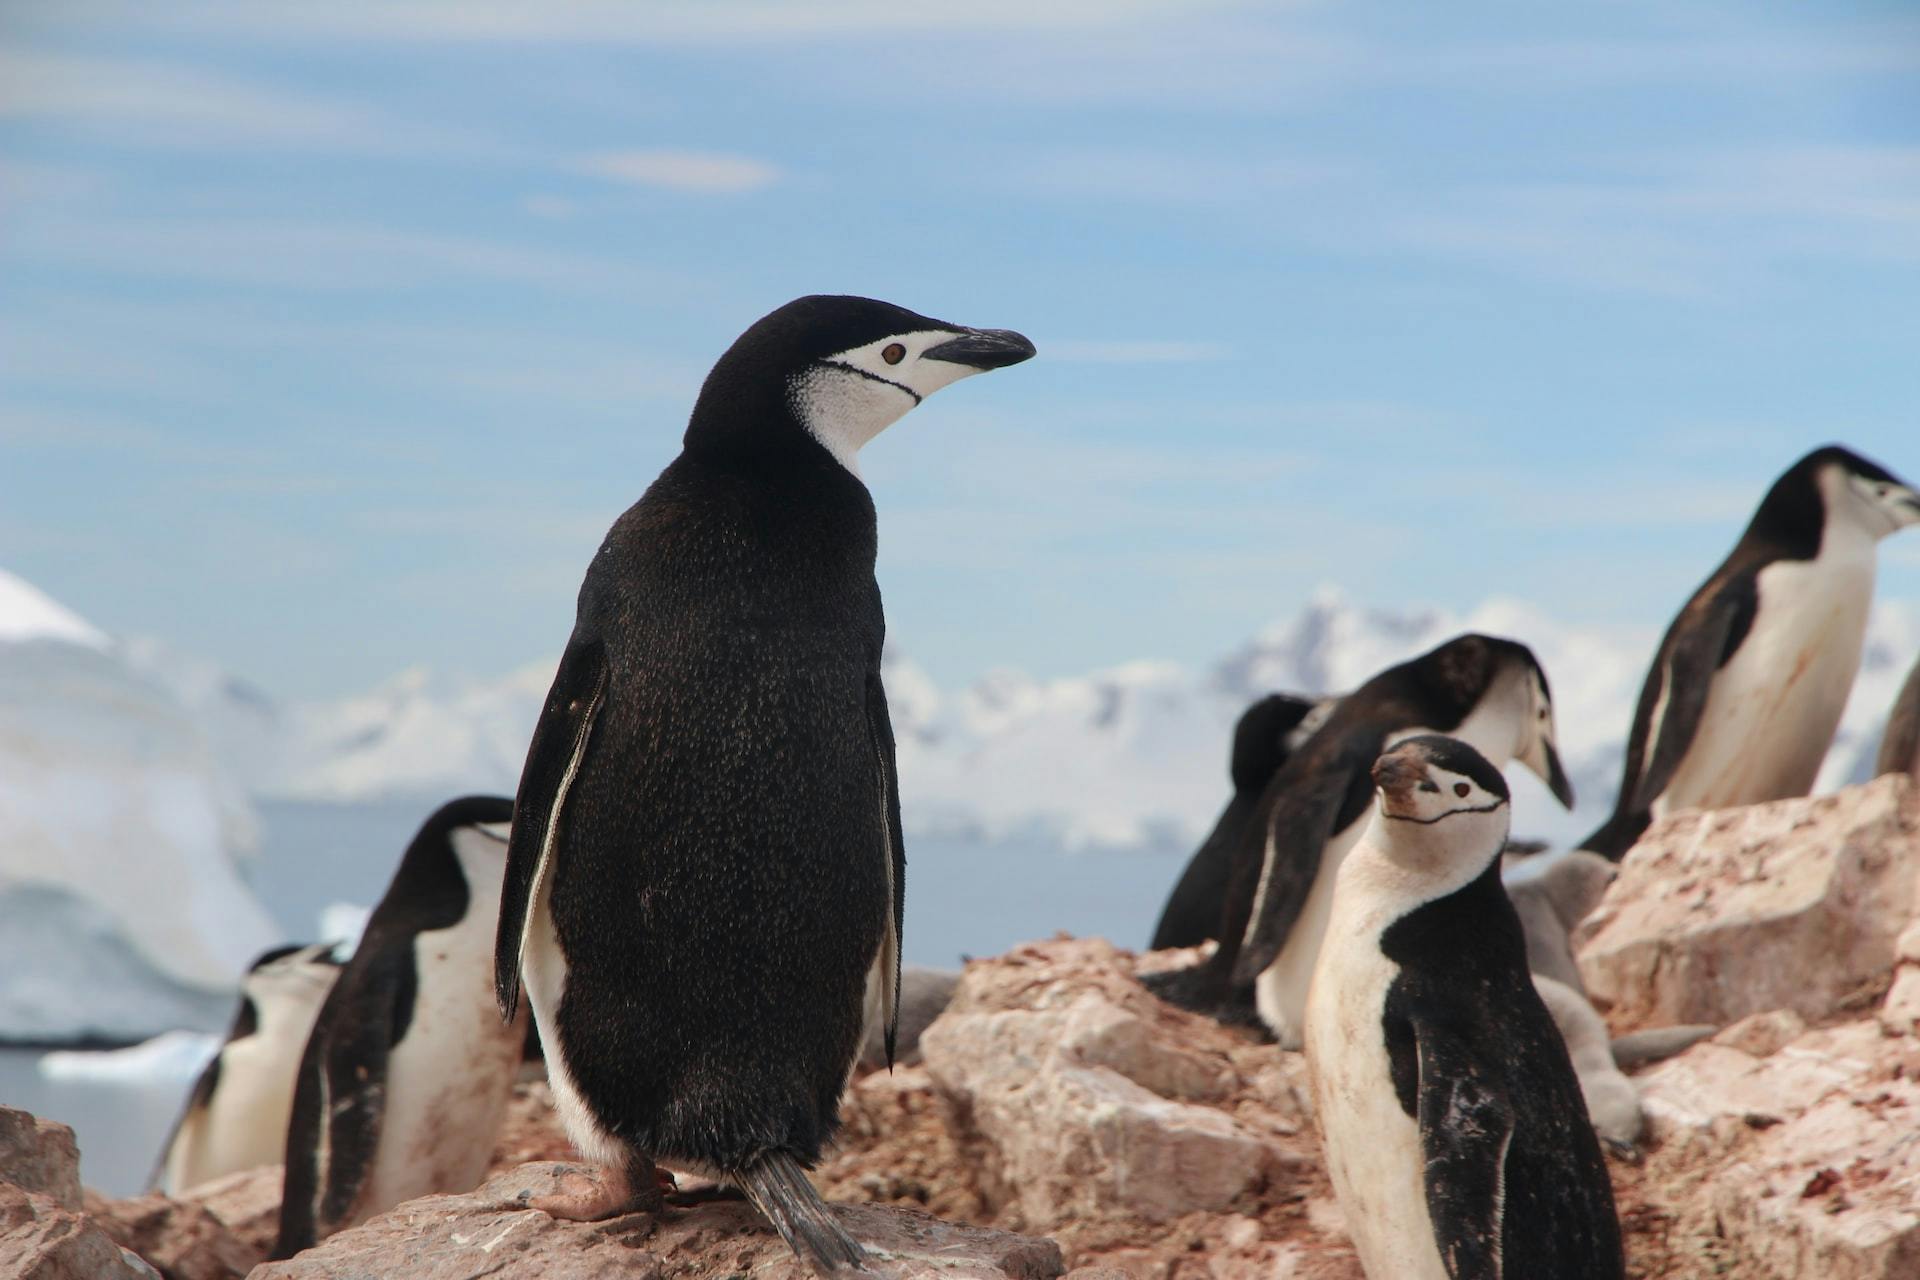 To support establishment of MPAs in Antarctic waters